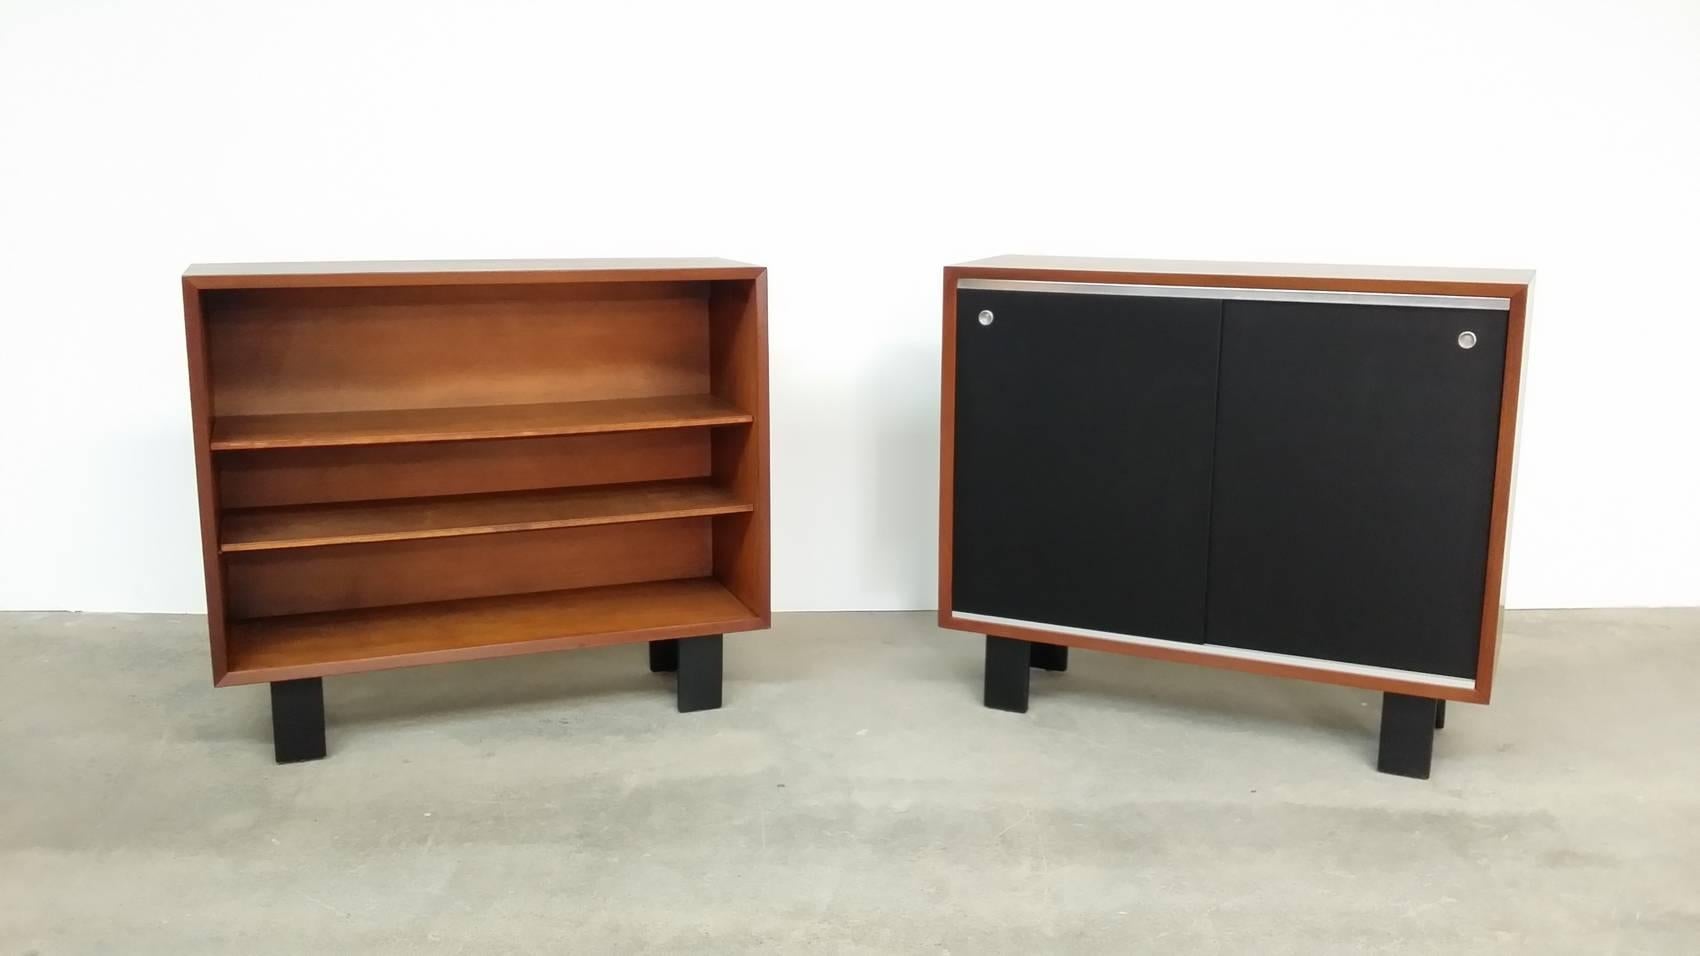 George Nelson Basic Cabinet series, designed circa 1946, and produced by Herman Miller. Cases are walnut, and have been professionally re-finished. One is open faced, and has tow adjustable shelves. The other has two sliding black lacquered masonite